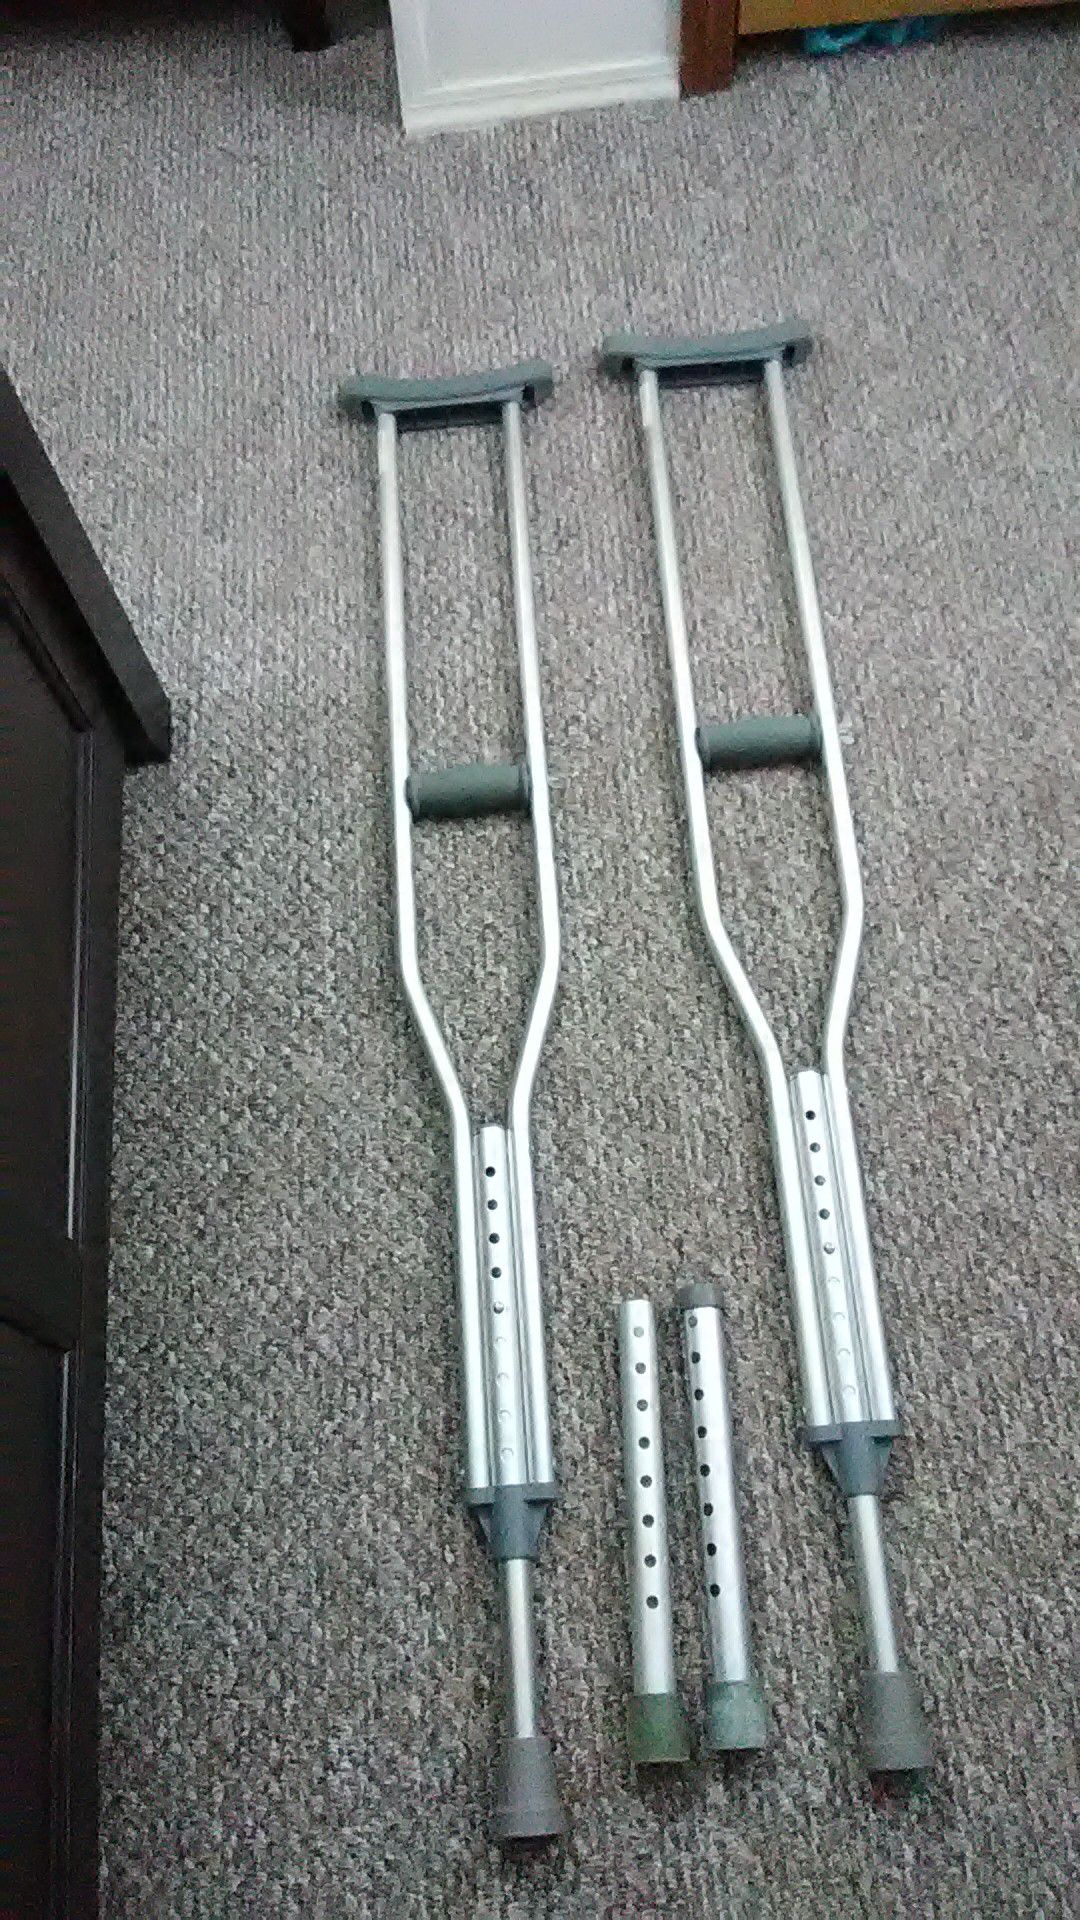 Justable crutches